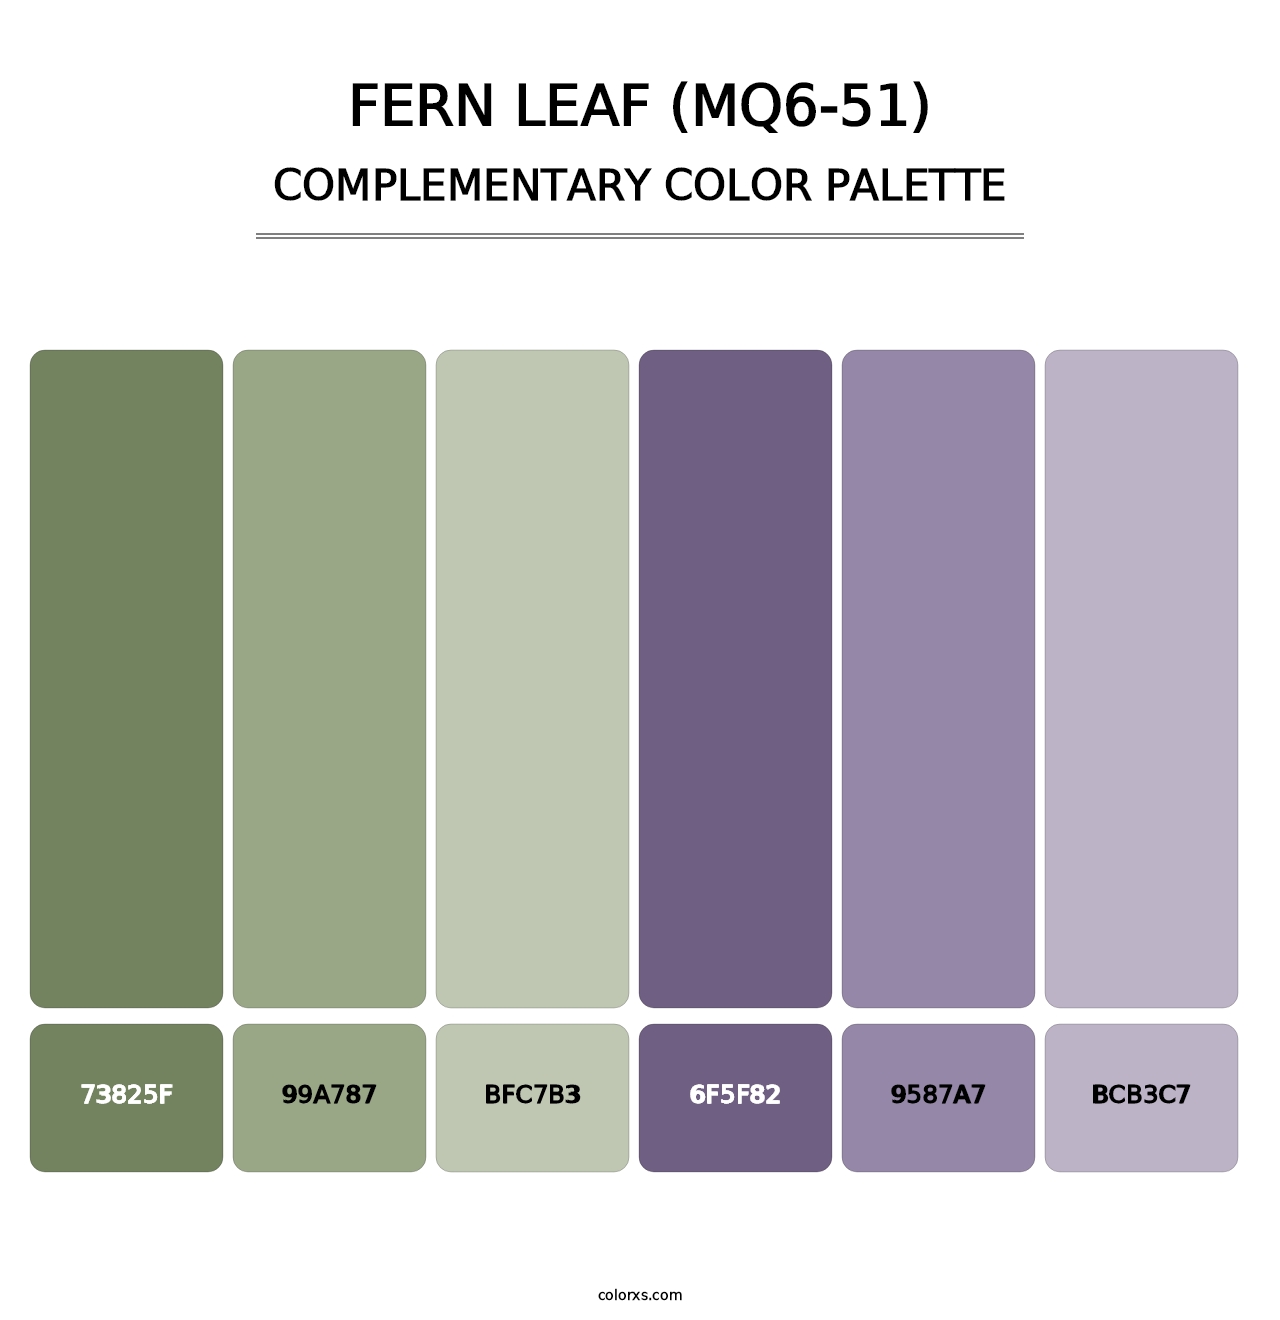 Fern Leaf (MQ6-51) - Complementary Color Palette